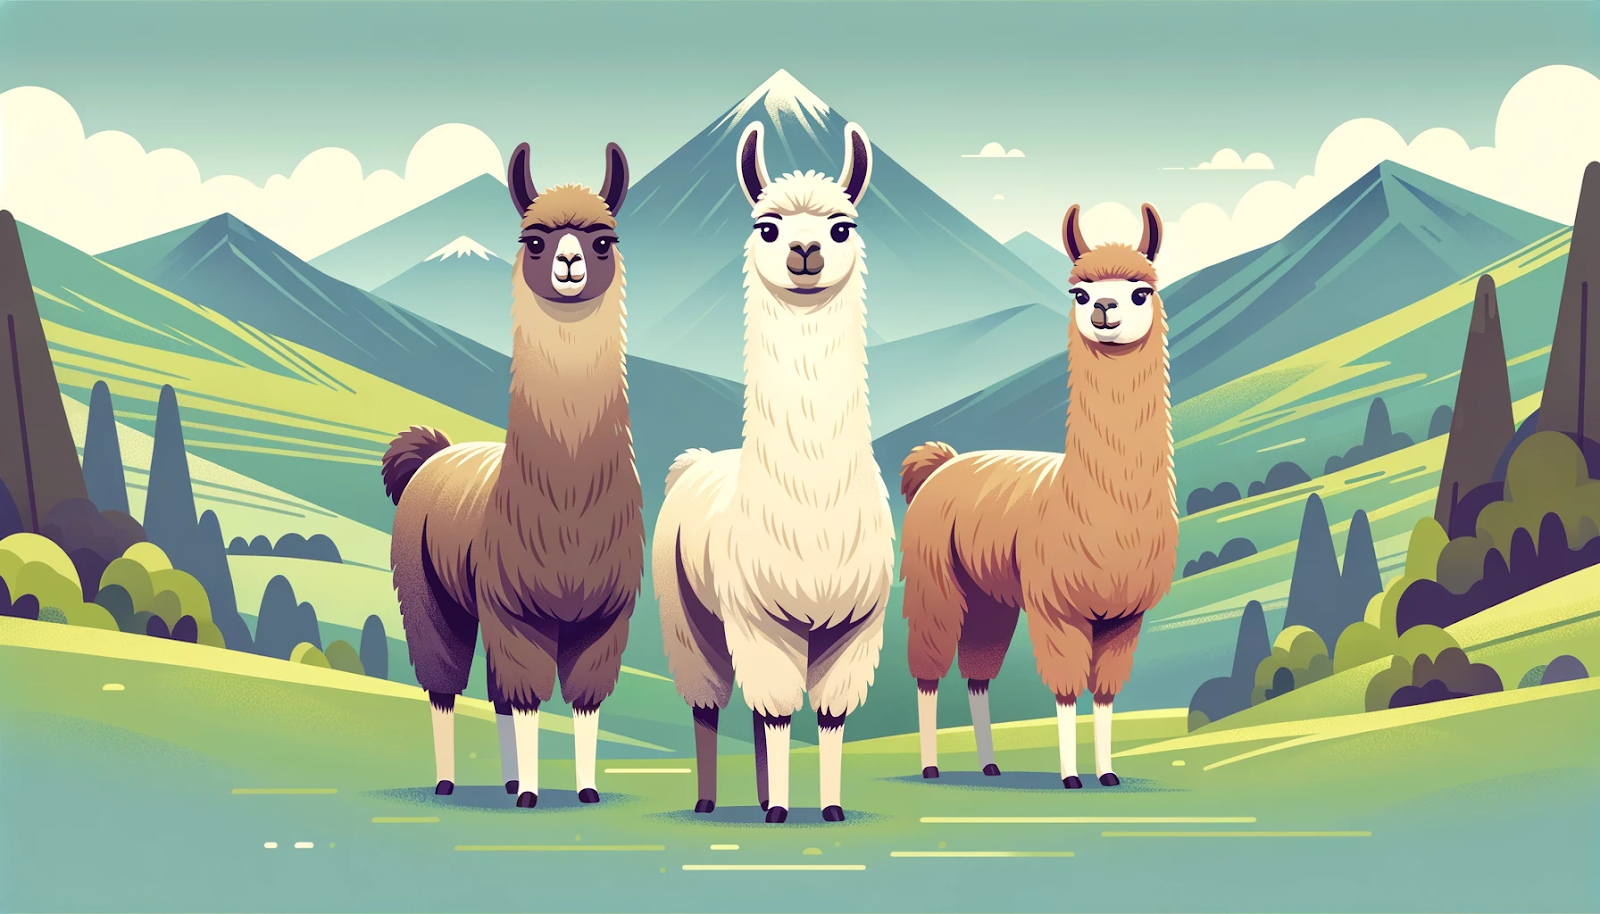 An illustration for Llama 3 generated by the author with the help of ChatGPT